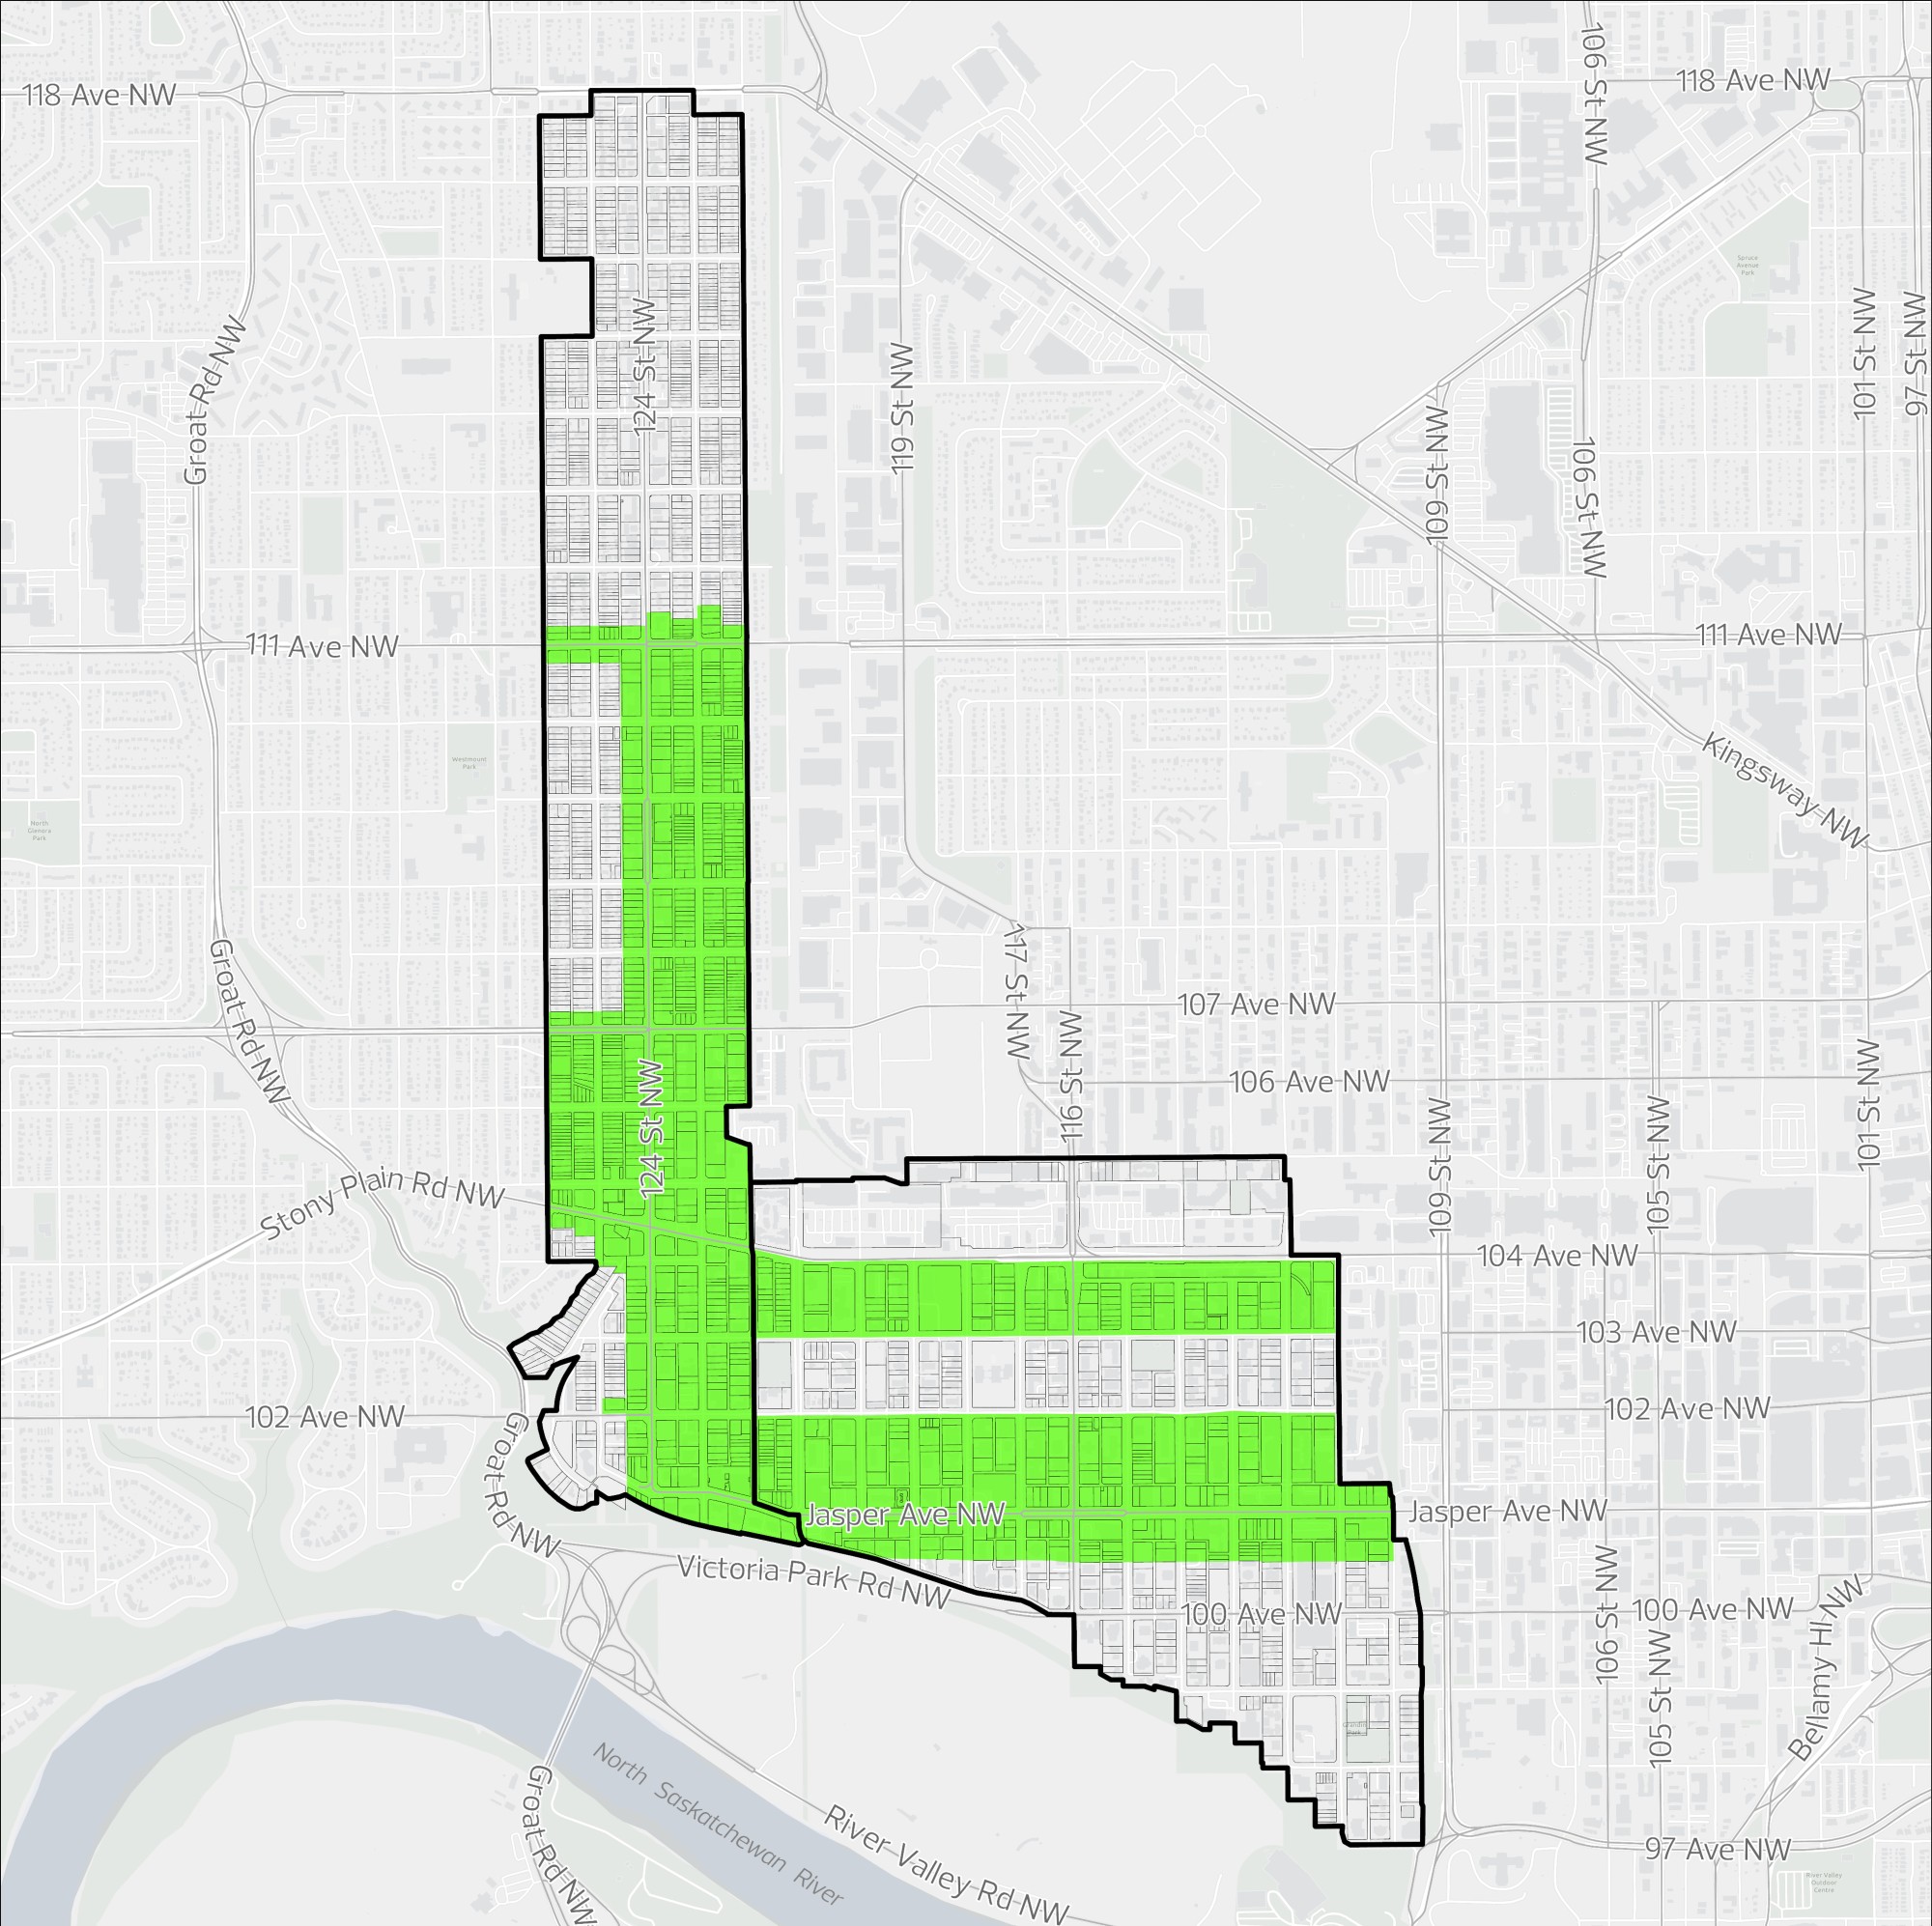 124 Street and Oliver Priority Growth Area